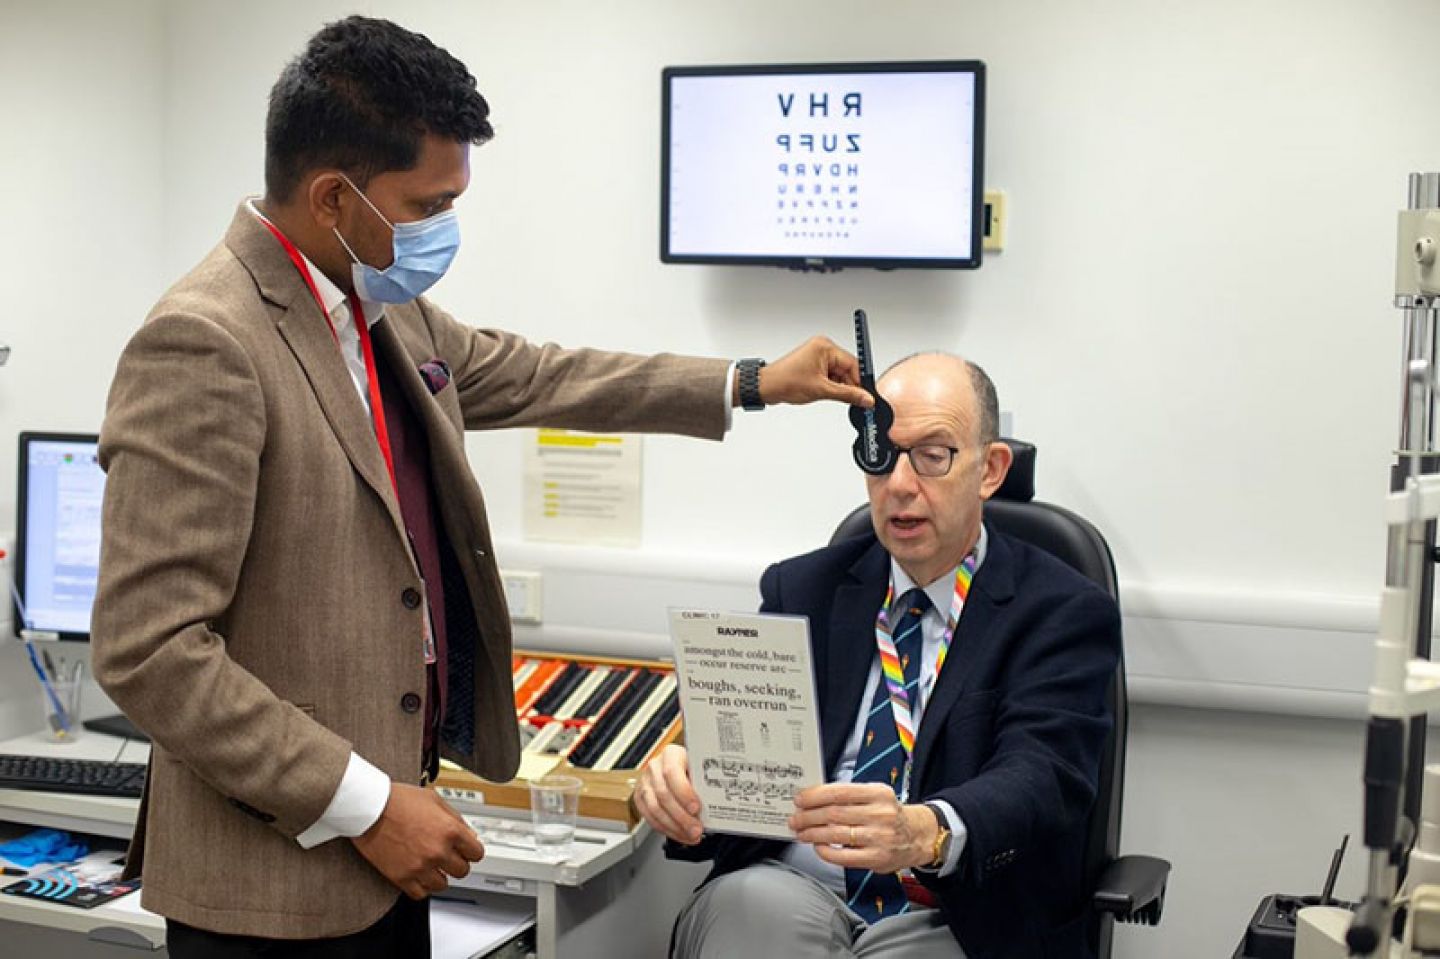 Prof Sir Anthony Finkelstein having his near vision tested with a chart